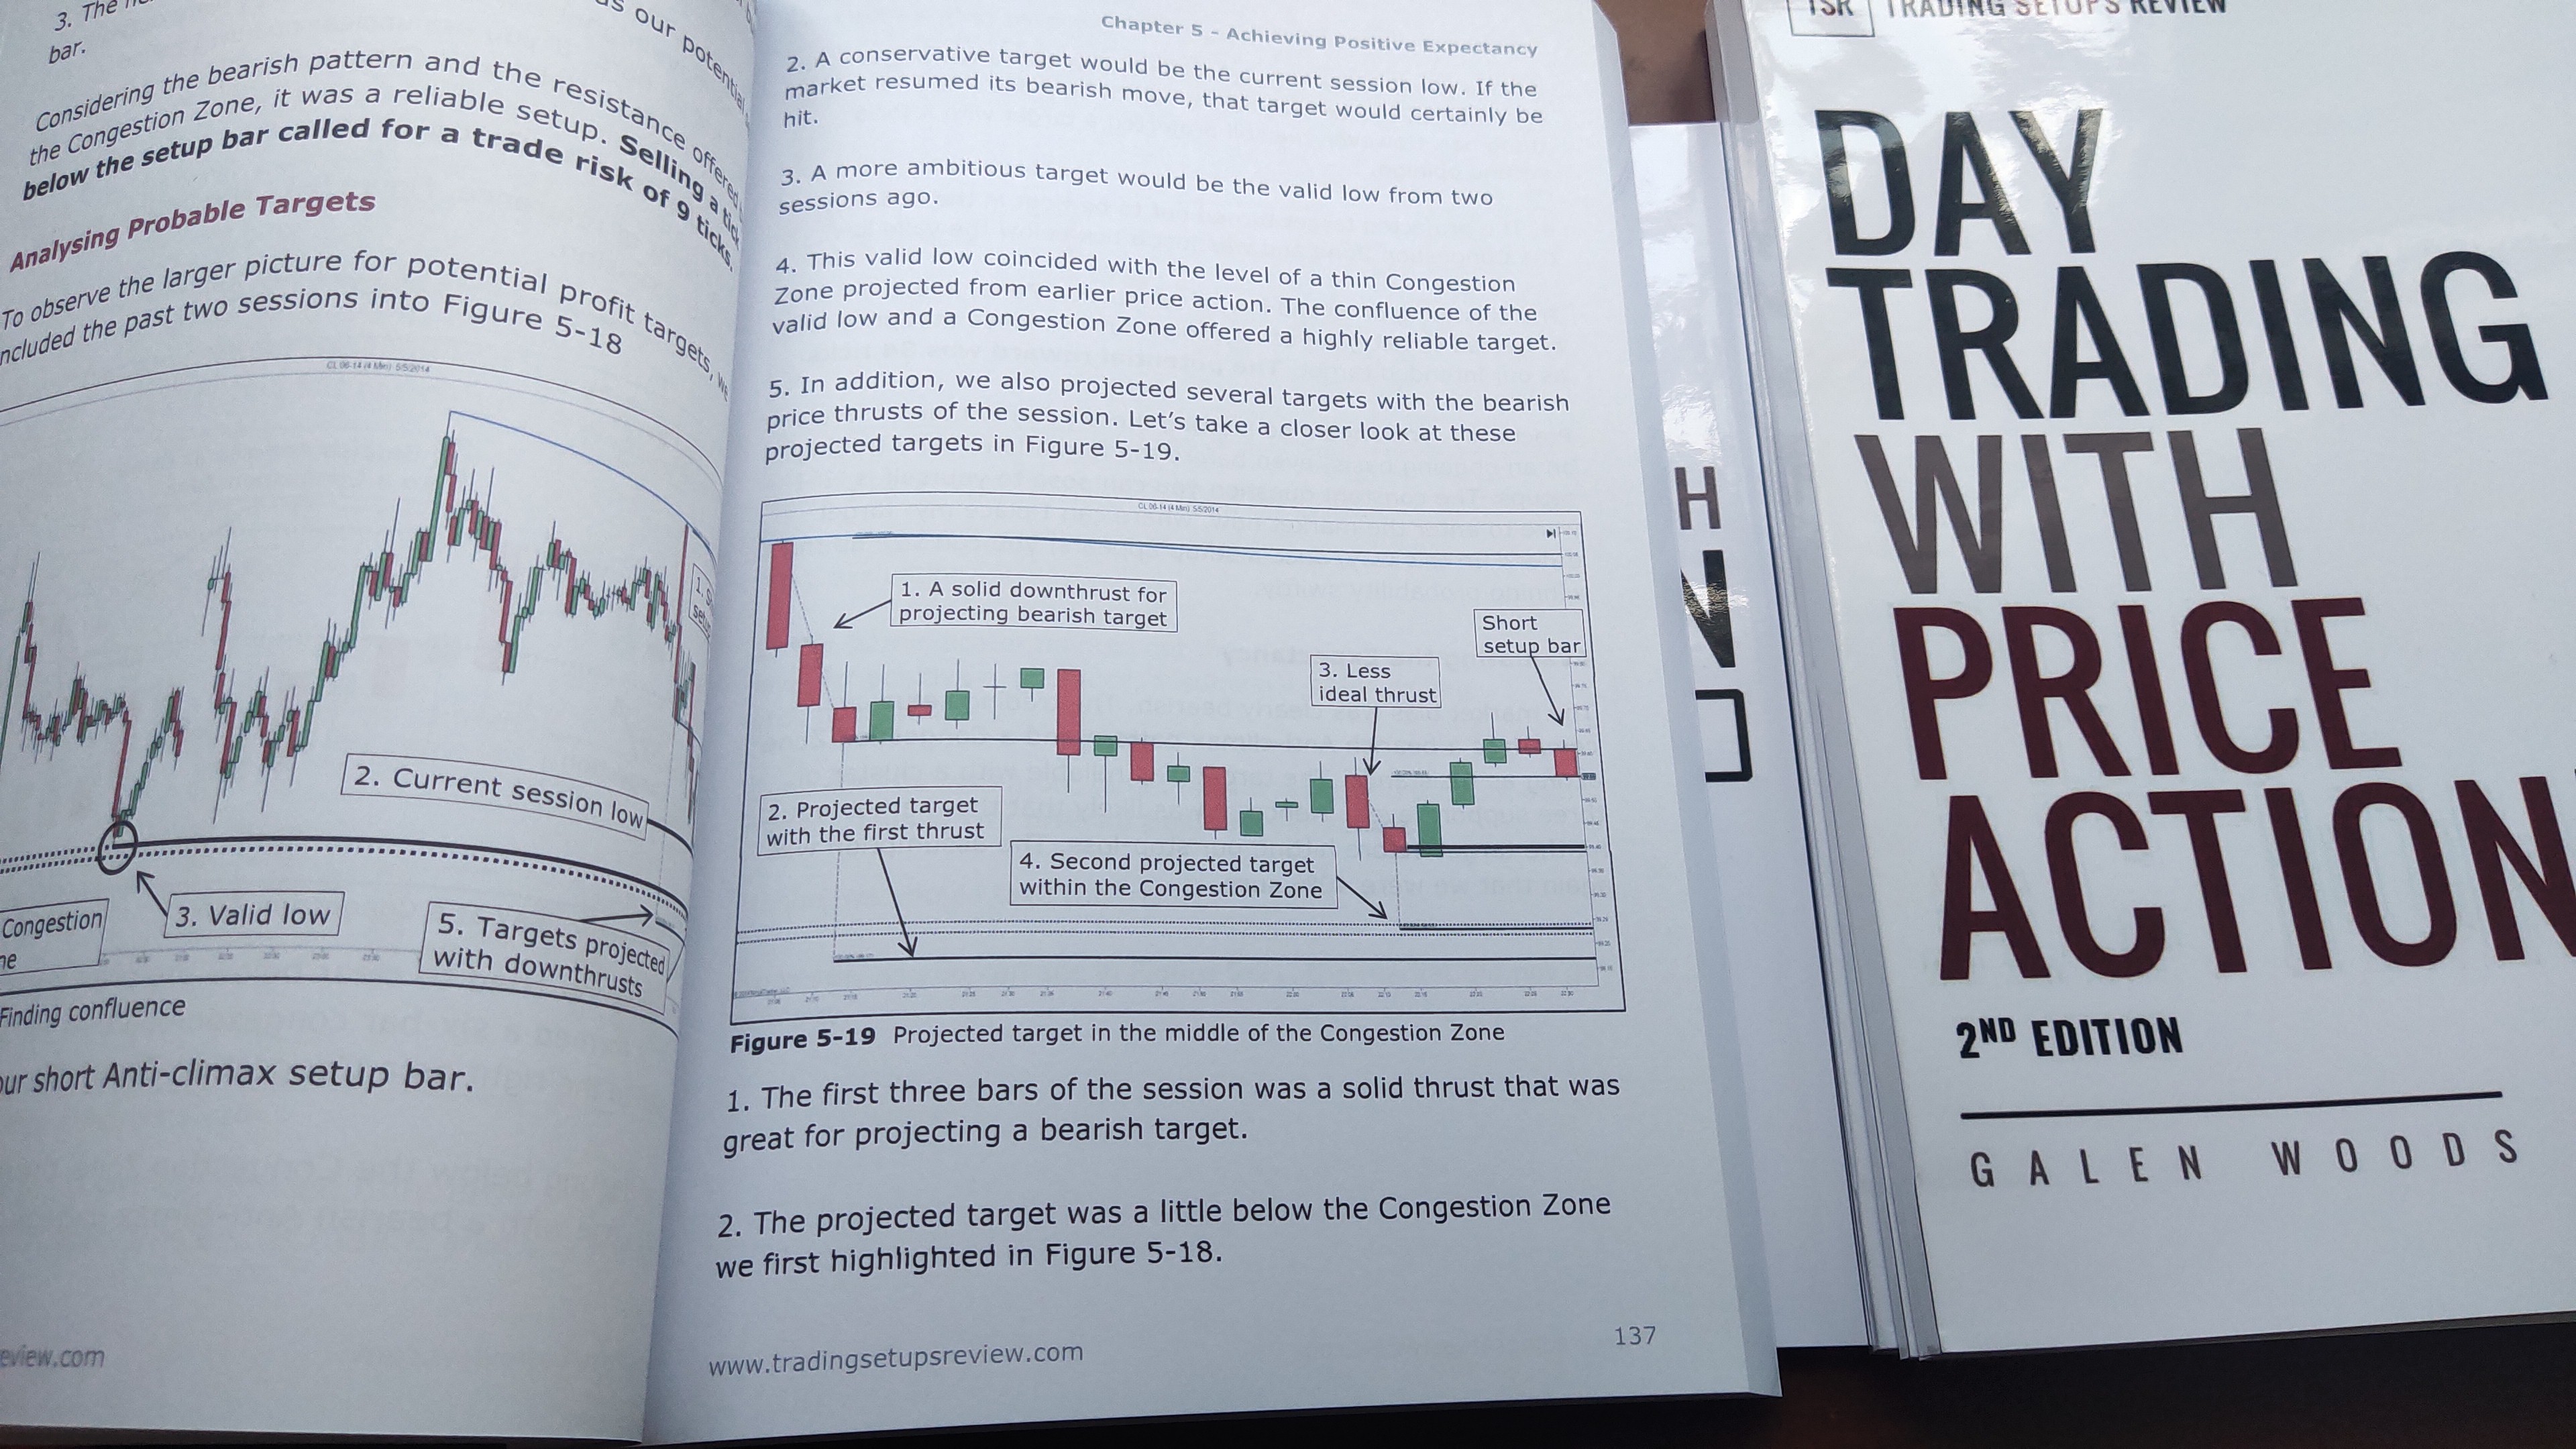 Day Trading with Price Action - Volume III tiếng Việt